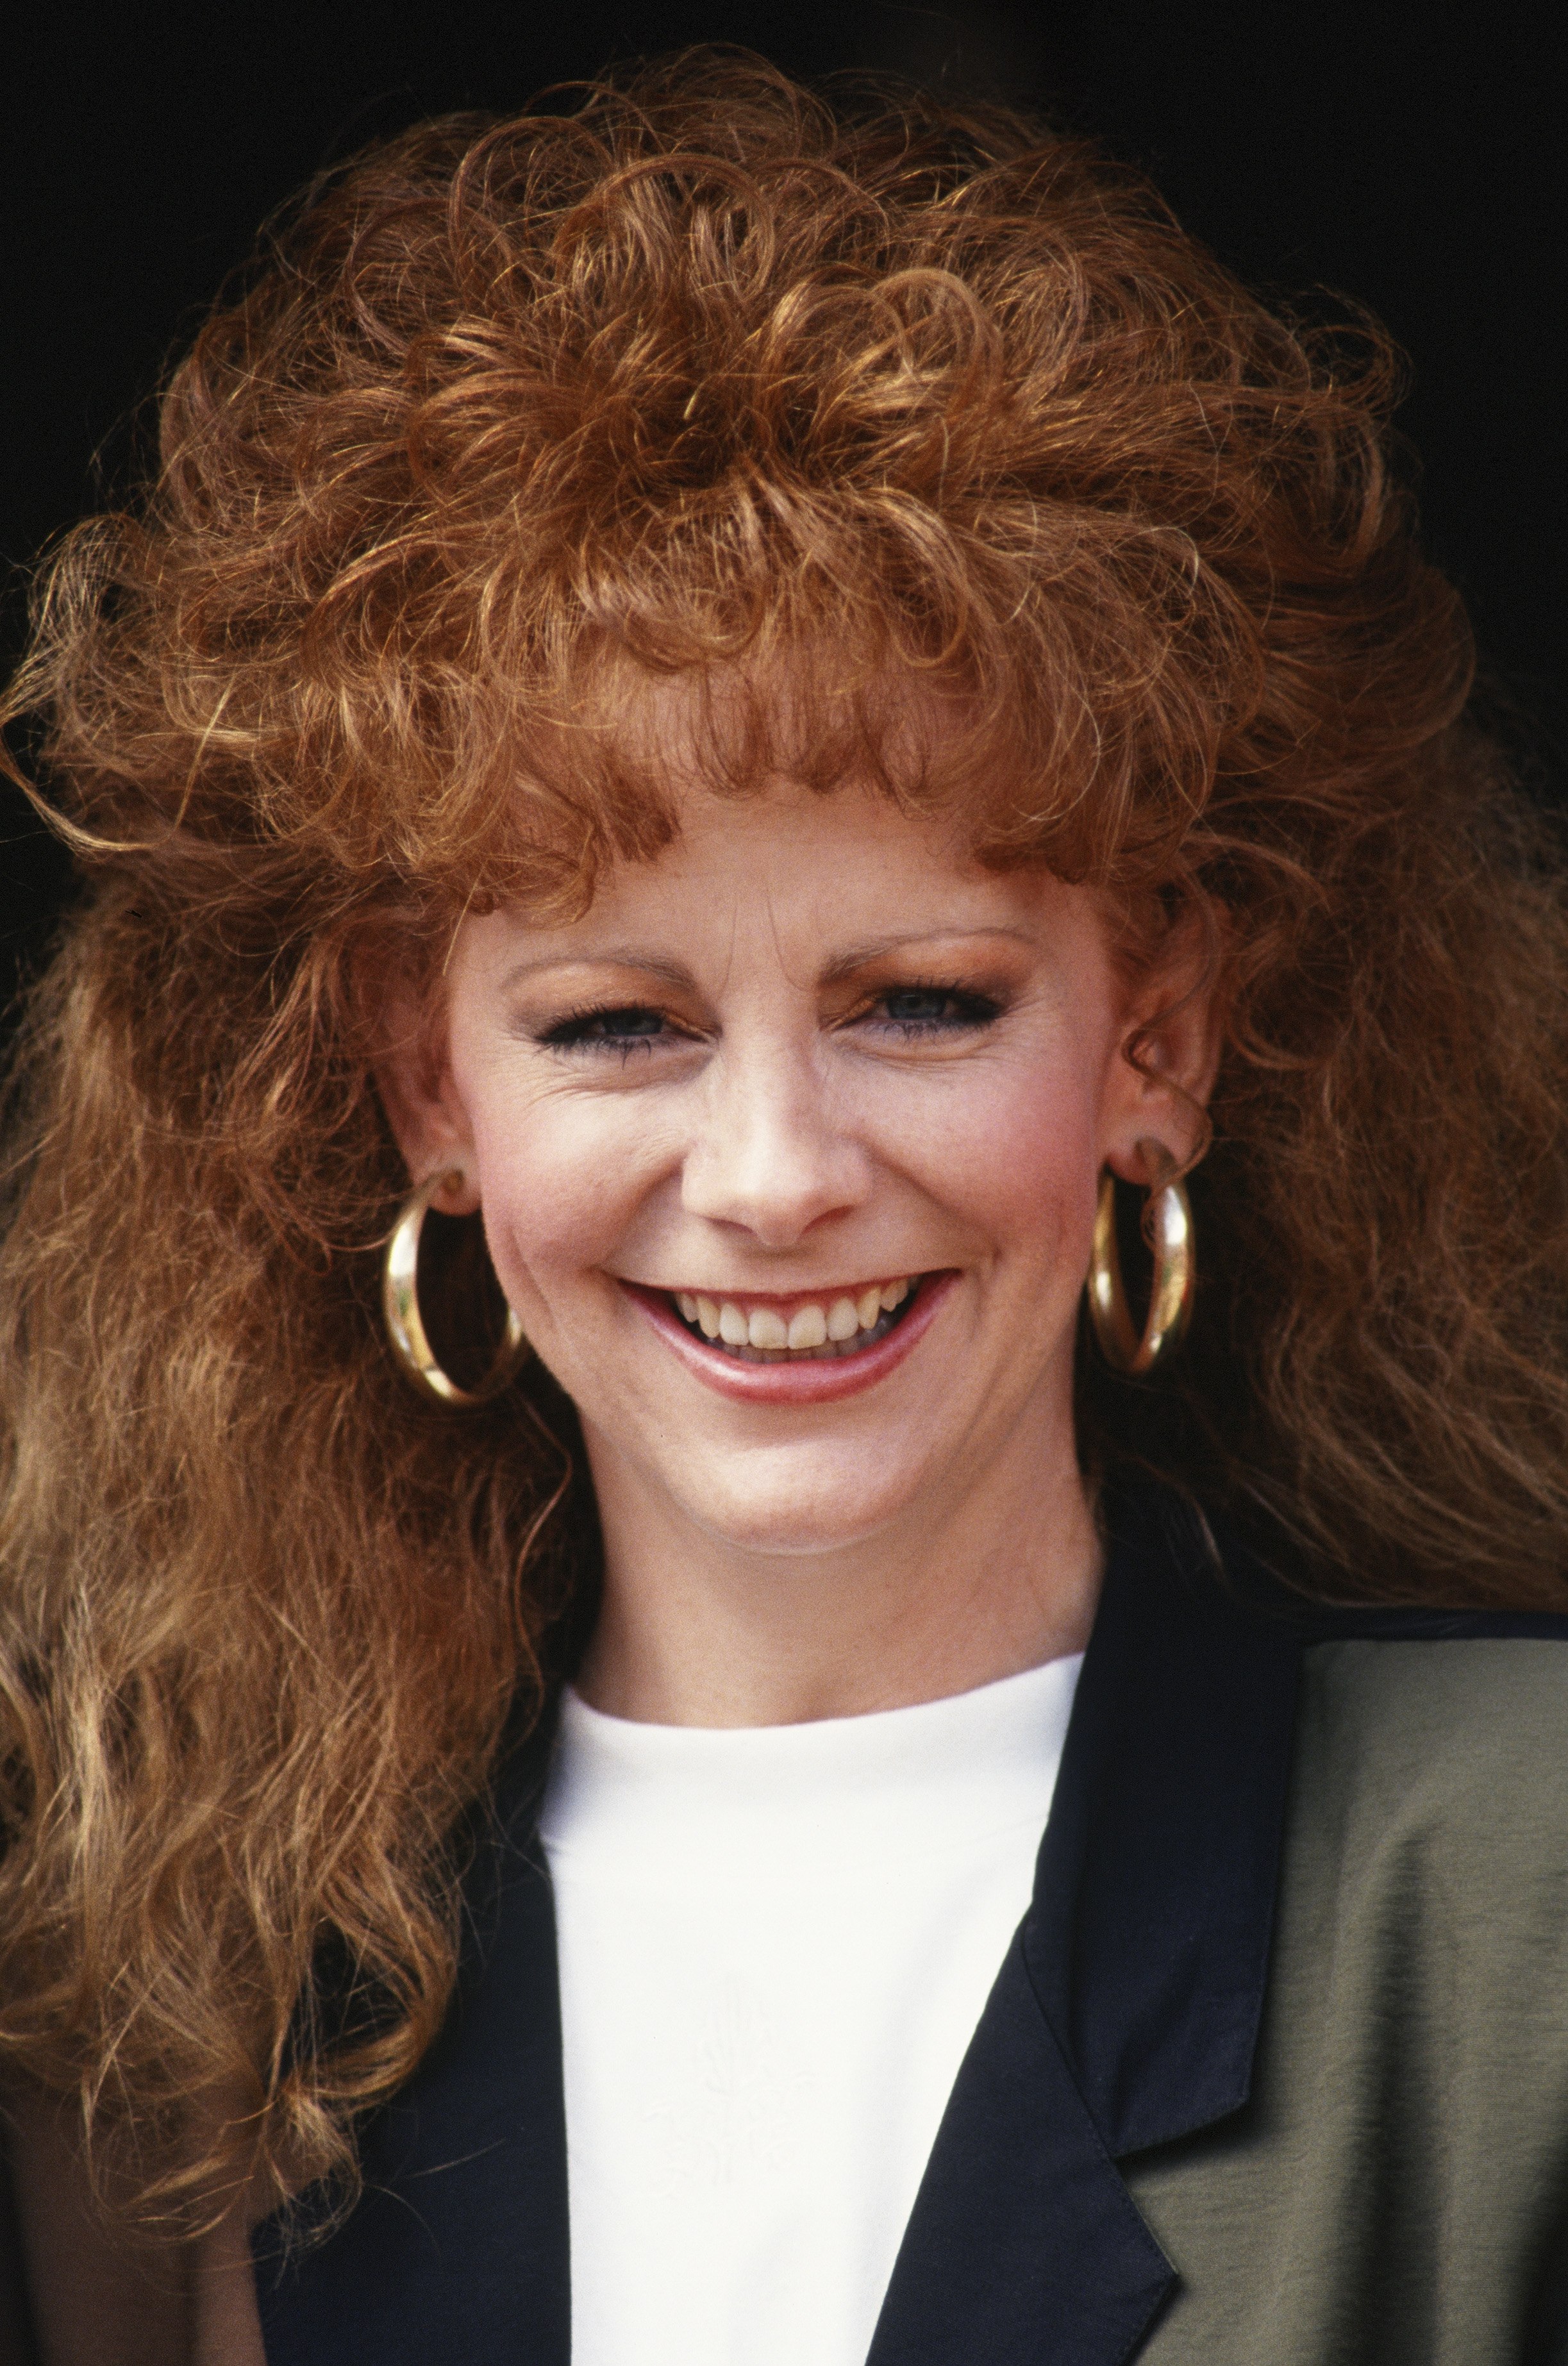 Reba McEntire posing for a photo portrait on October 1, 1990, in St. Louis, Missouri. | Source: Getty Images